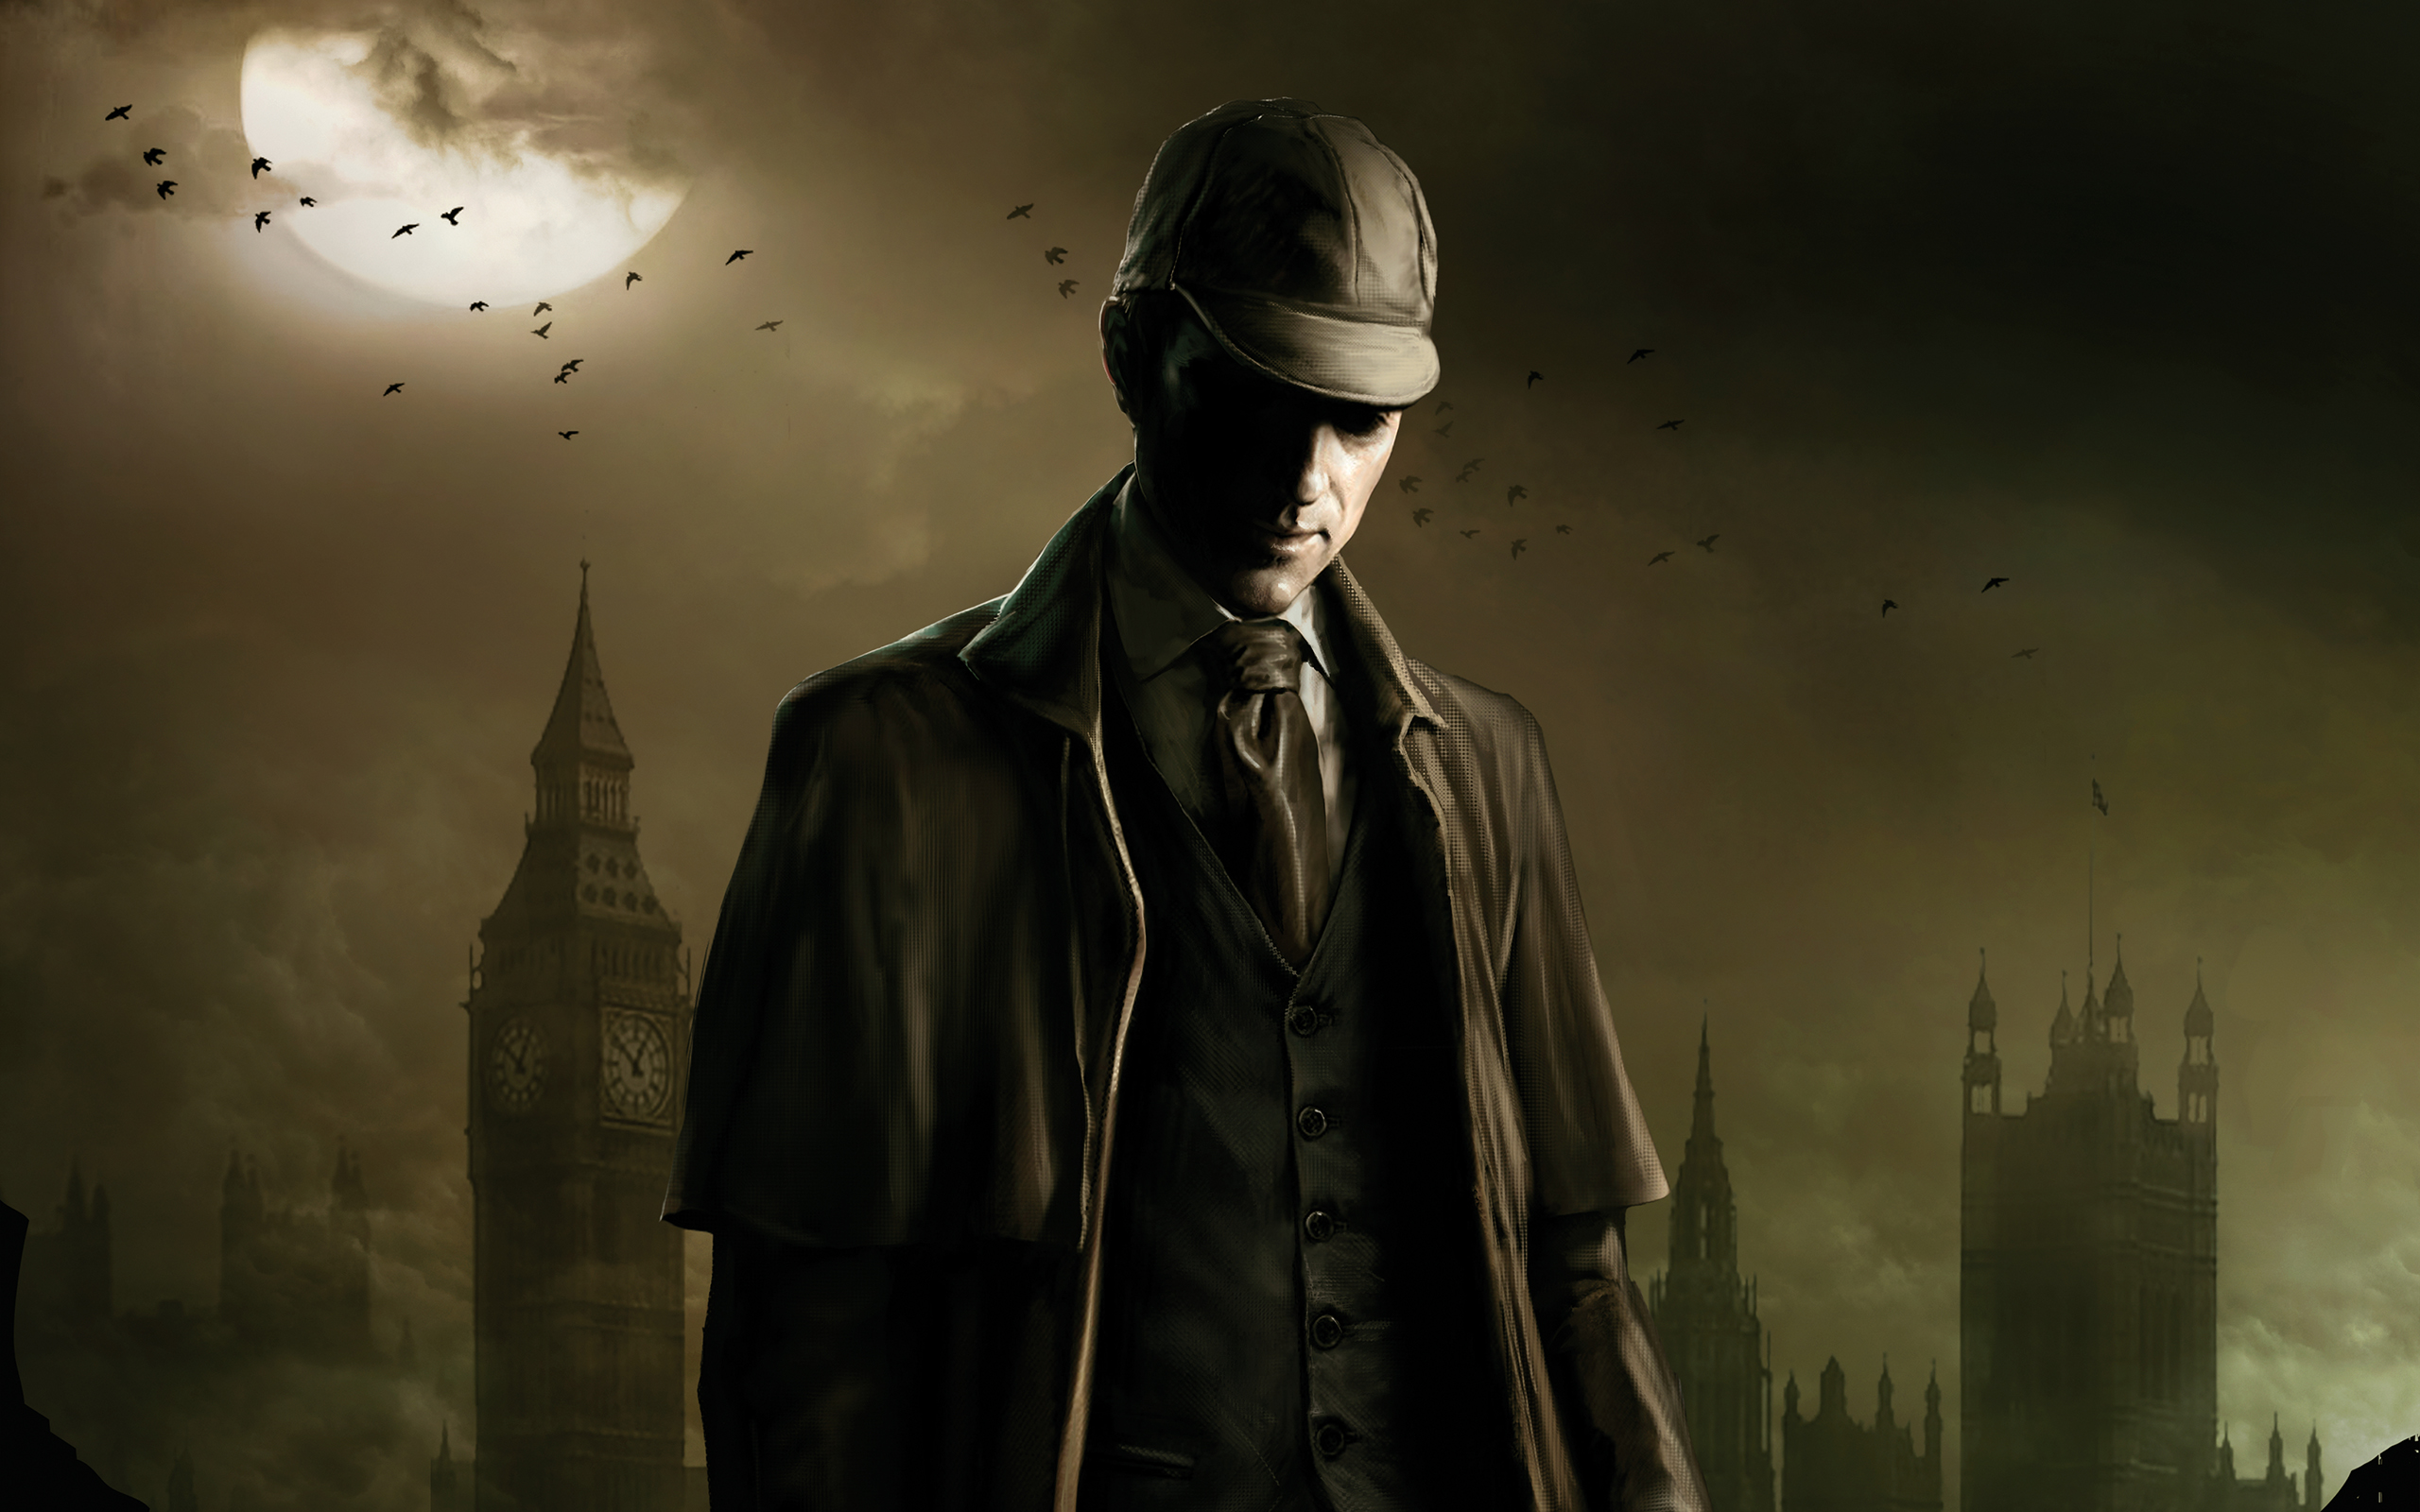 sherlock holmes wallpaper,action adventure game,pc game,movie,darkness,digital compositing